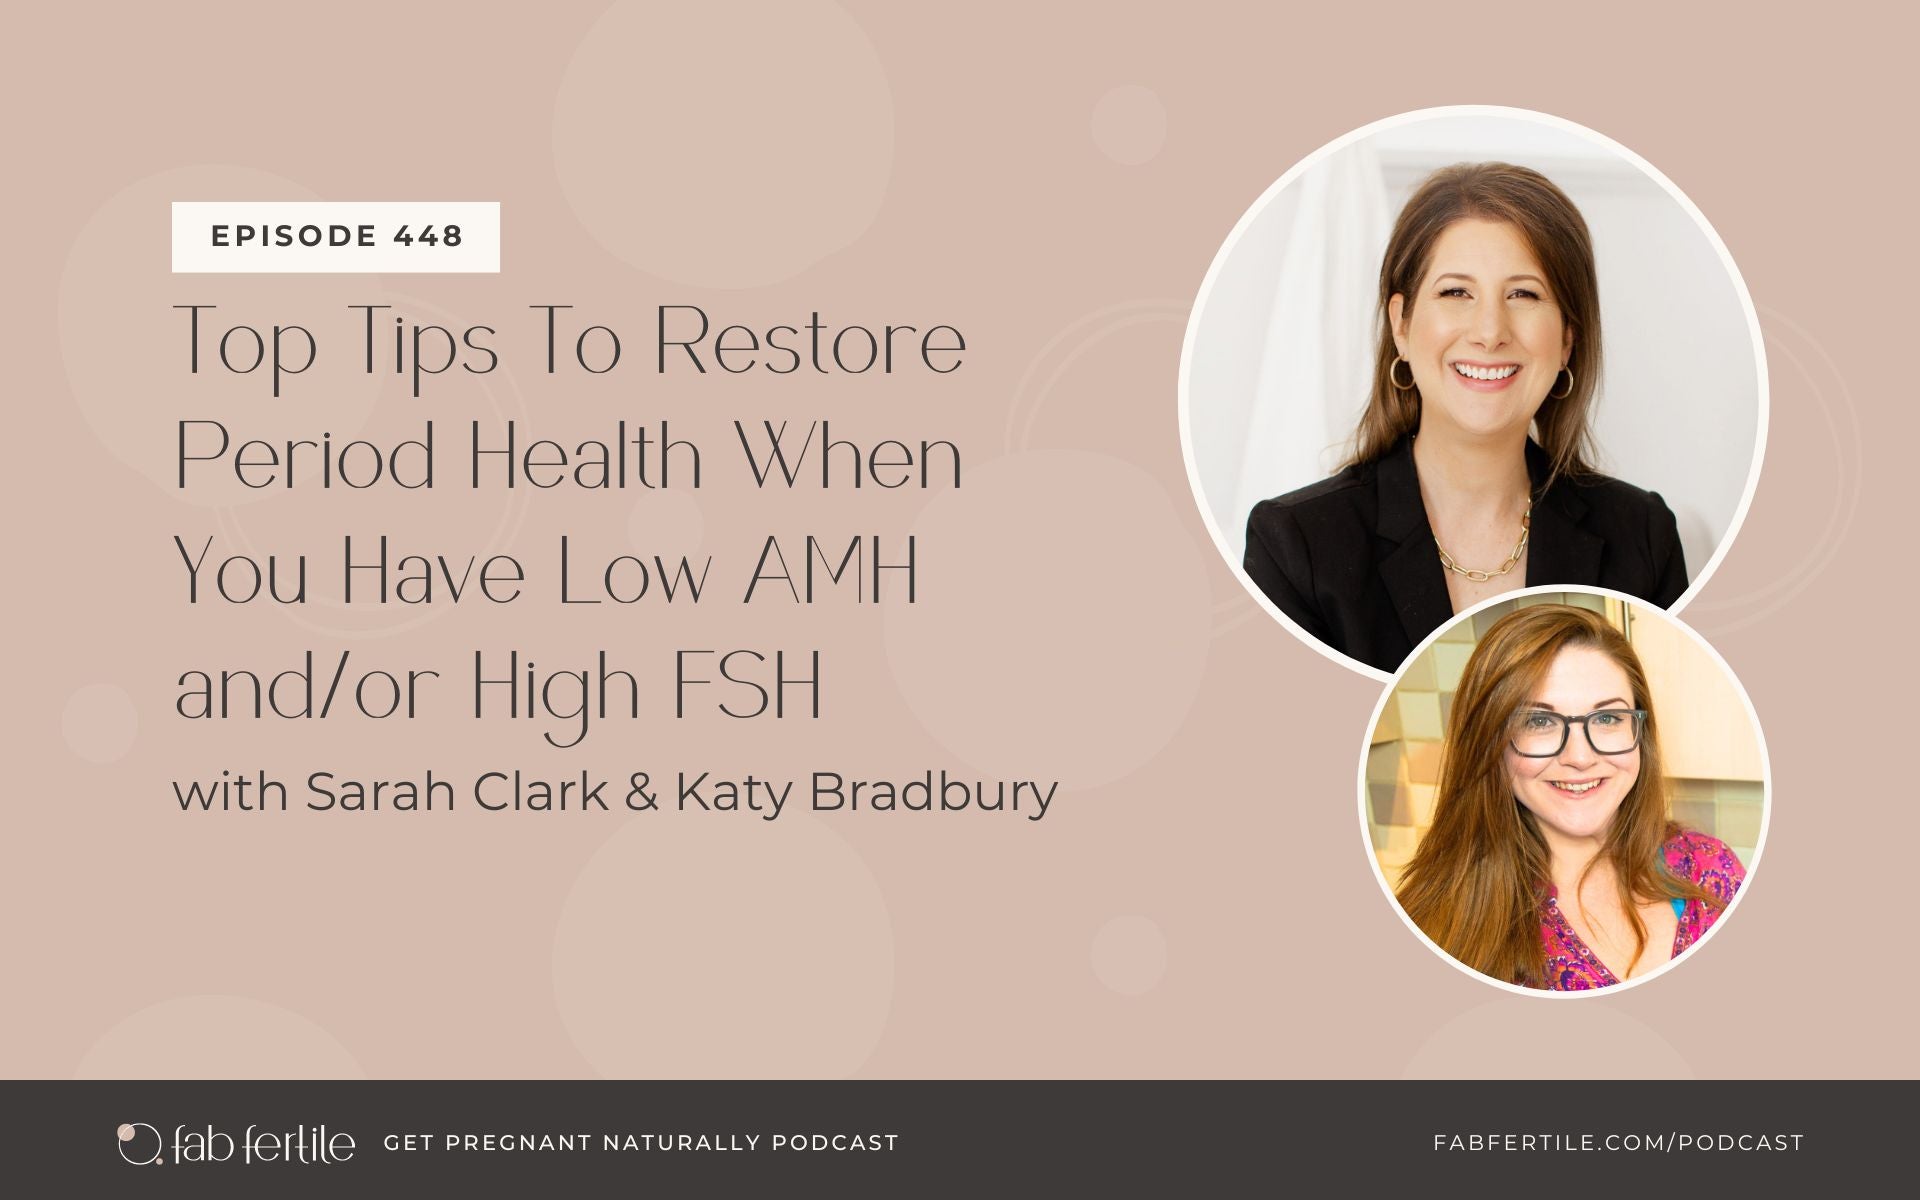 Top Tips To Restore Period Health When You Have Low AMH and/or High FSH